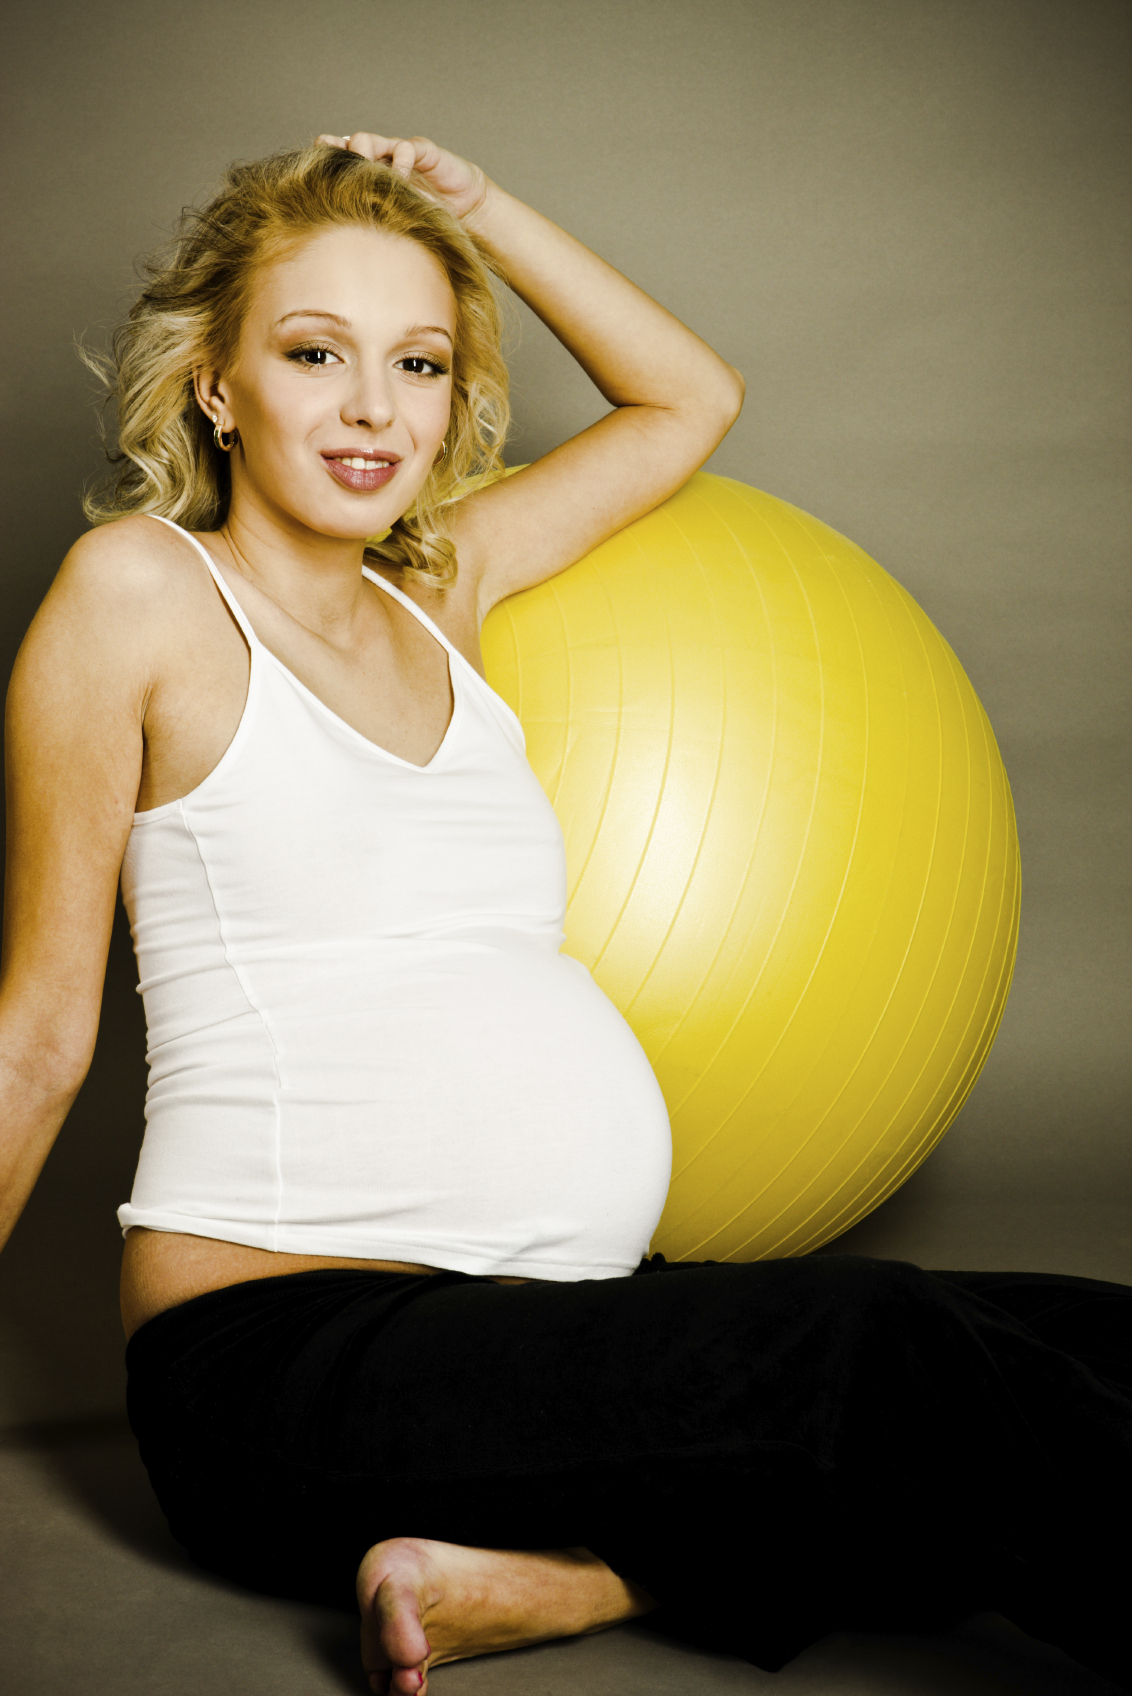 Pilates and Pregnancy: Exercise Guidelines – Resources for More Information